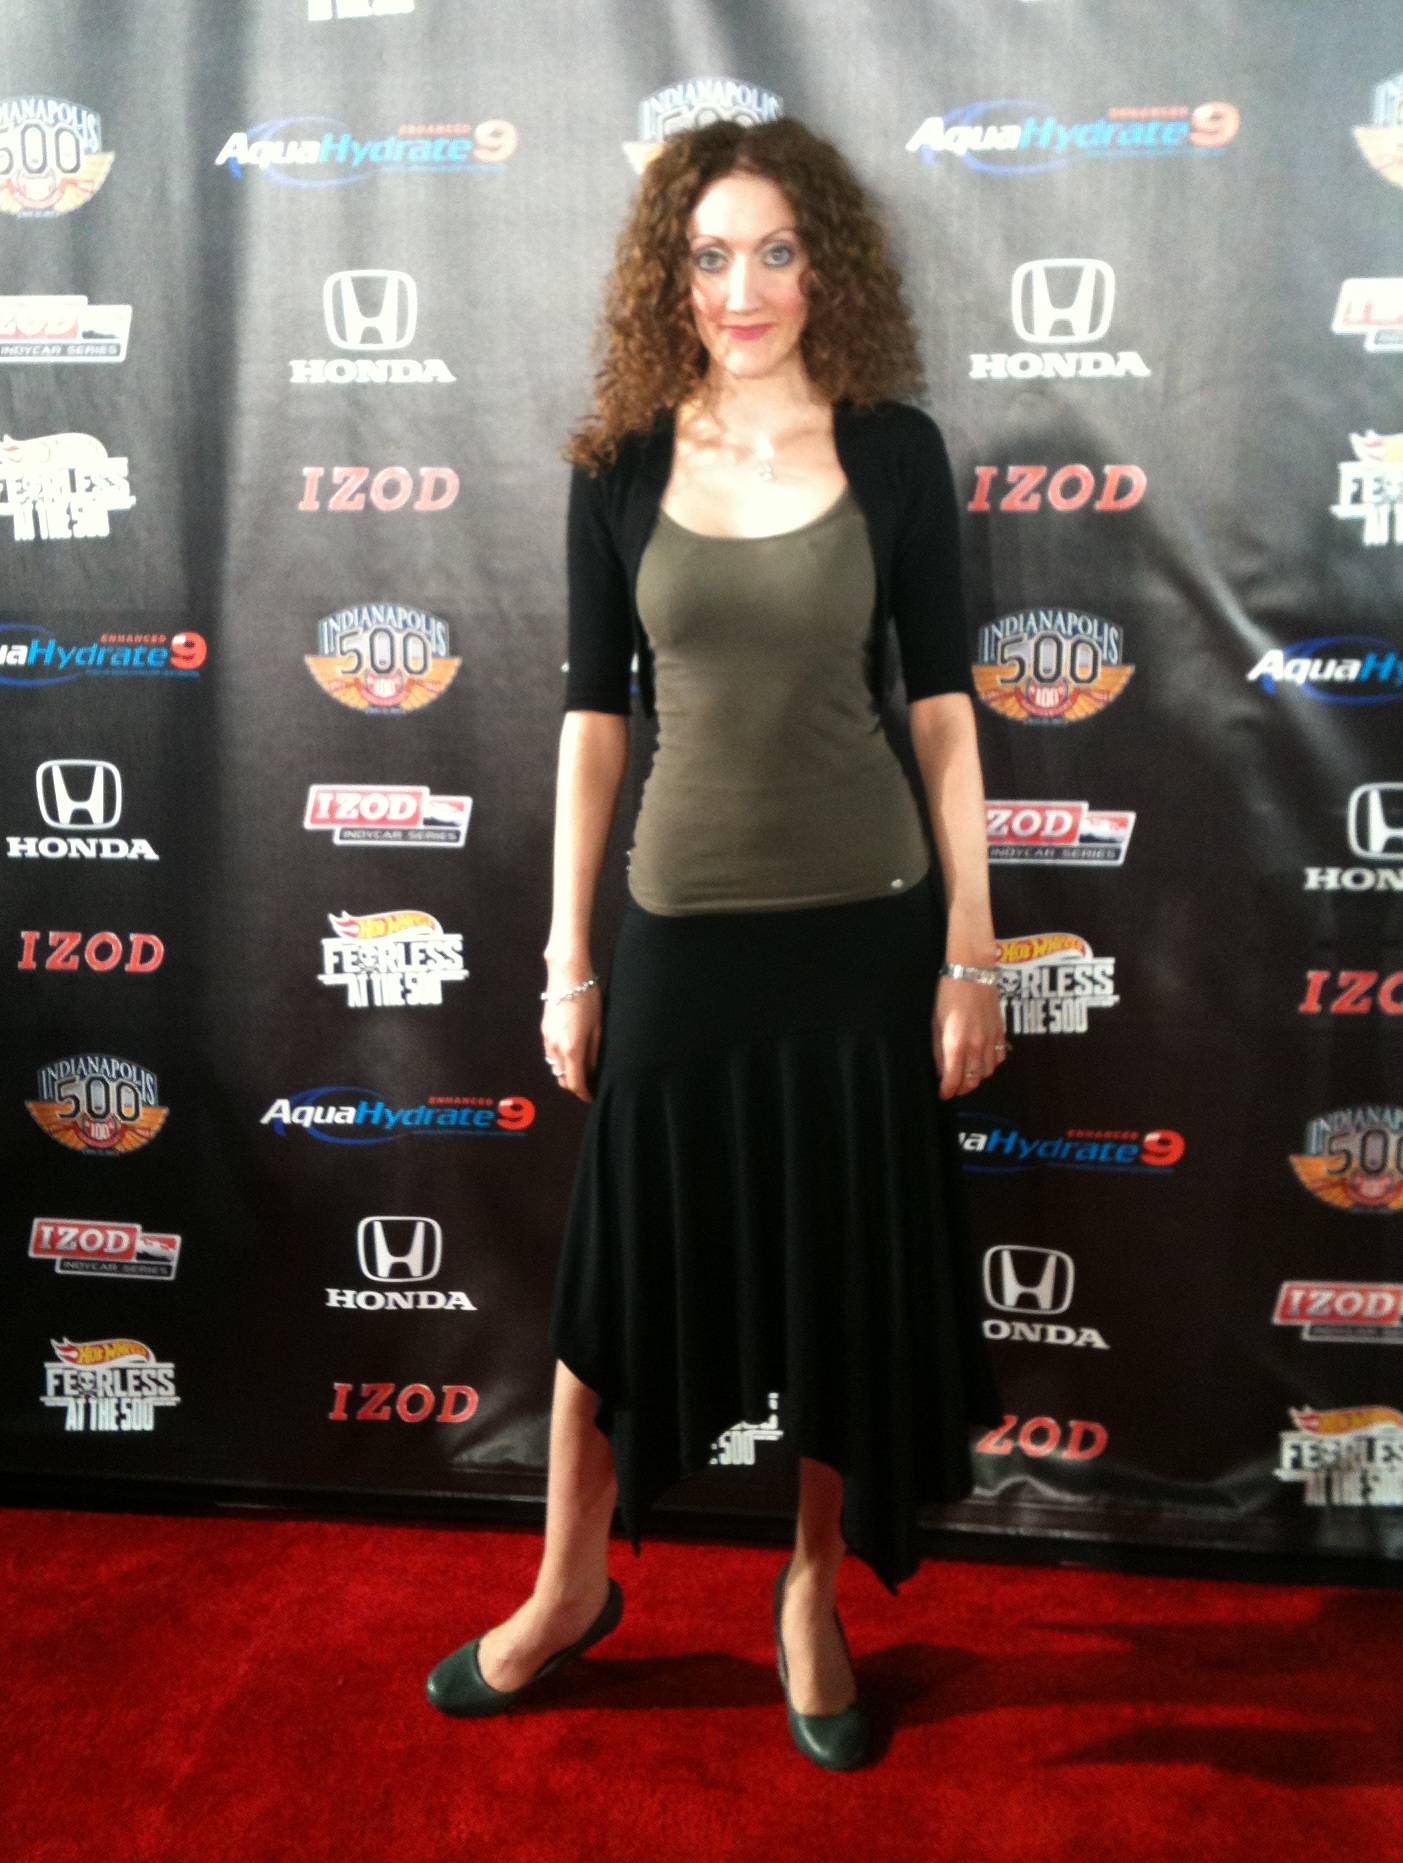 Charlotte Milchard on the red carpet of The 100th Anniversary Indianapolis 500 Event